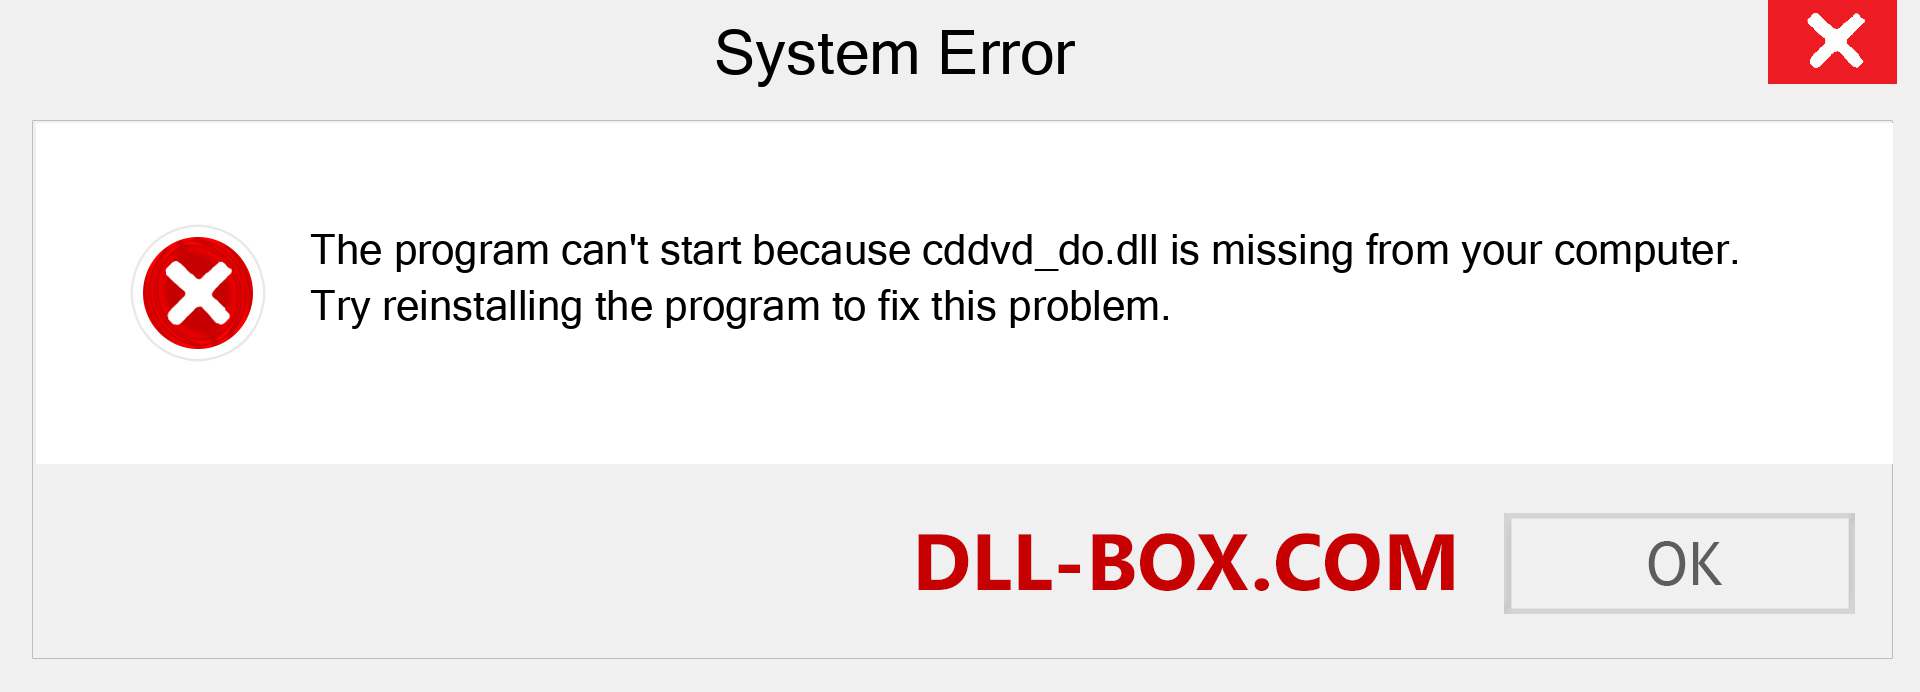  cddvd_do.dll file is missing?. Download for Windows 7, 8, 10 - Fix  cddvd_do dll Missing Error on Windows, photos, images